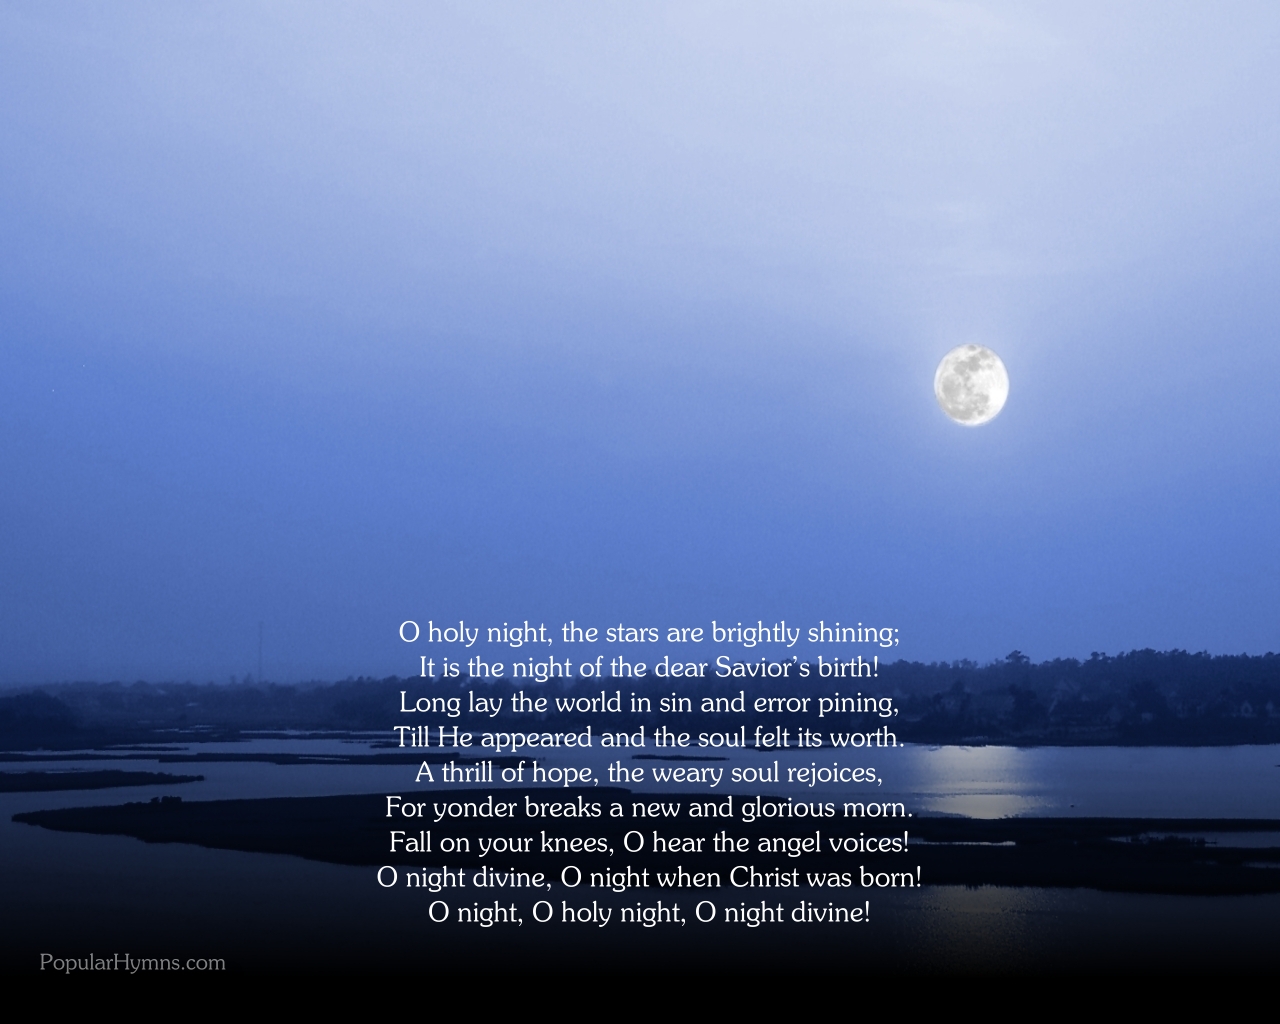 O Holy Night: are the lyrics biblical? - OverviewBible